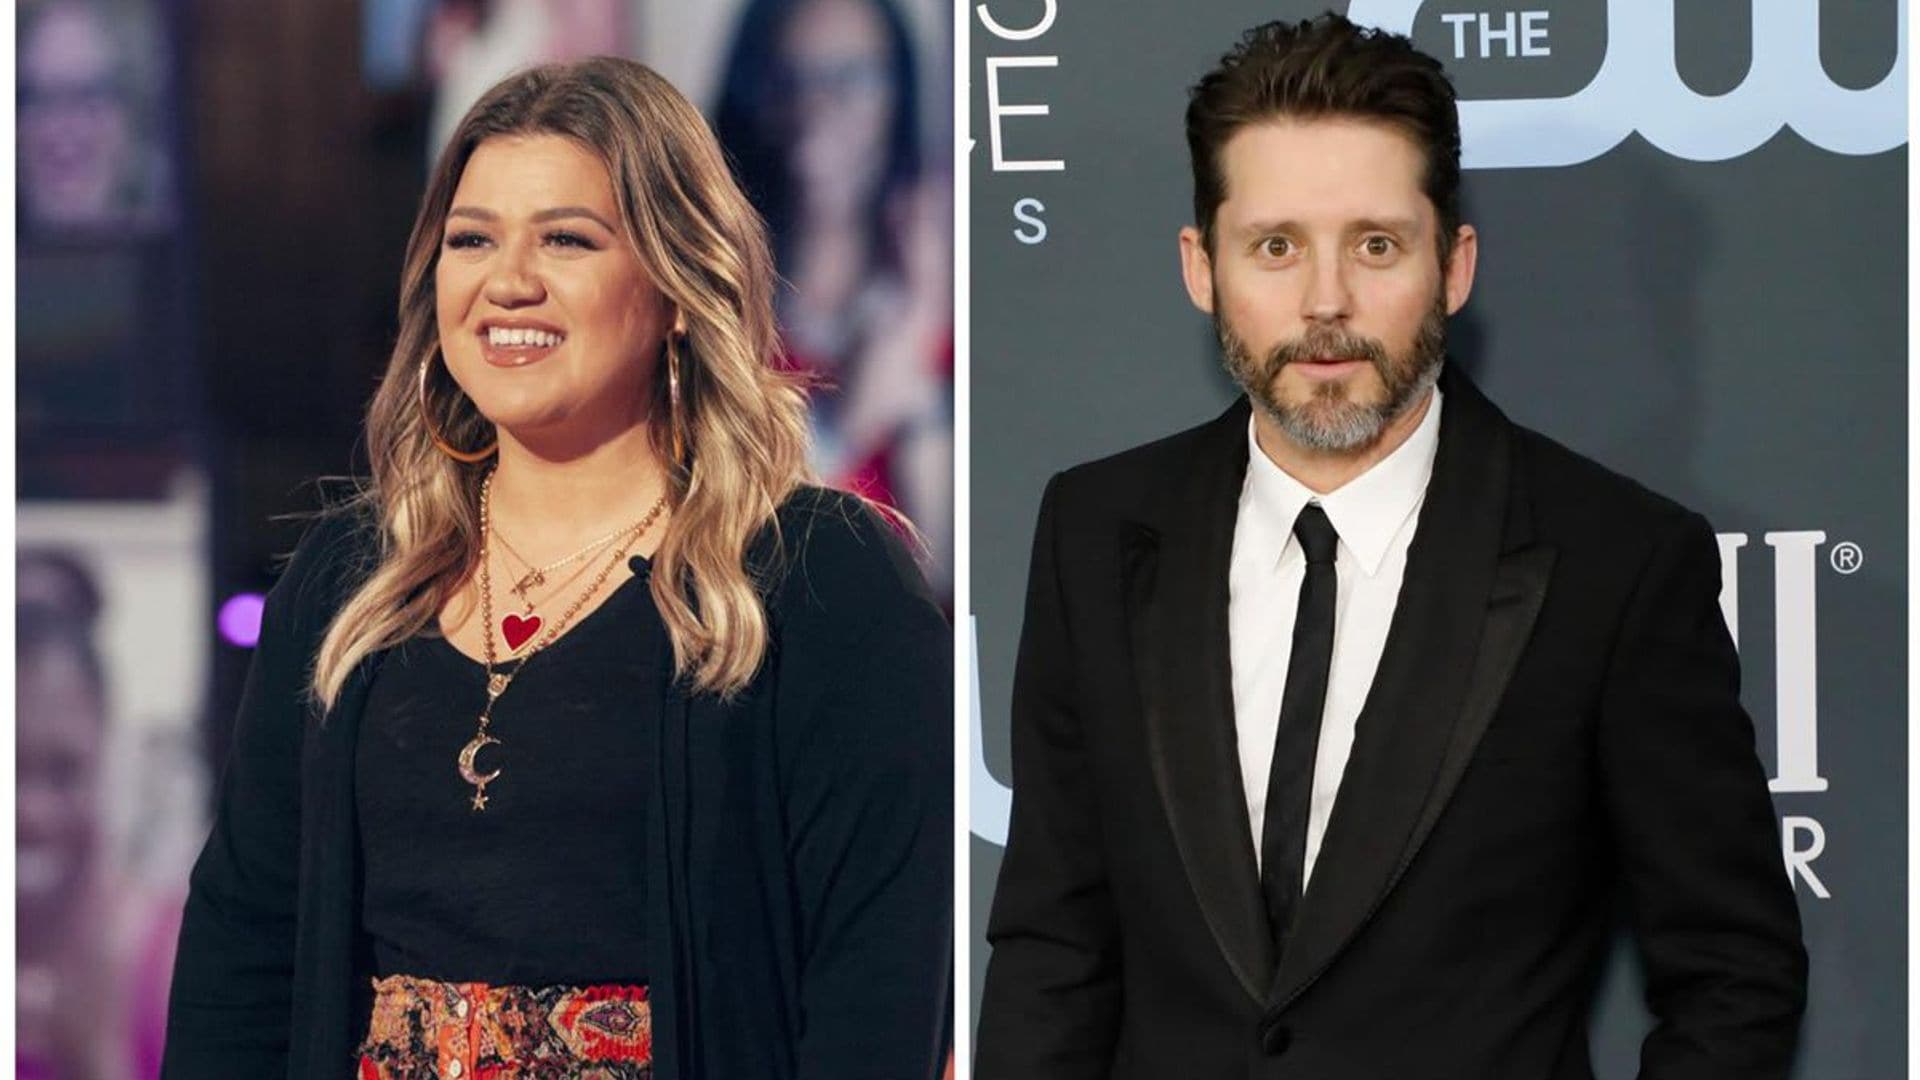 Kelly Clarkson ordered to pay ex-husband $200,000 a month amid difficult divorce